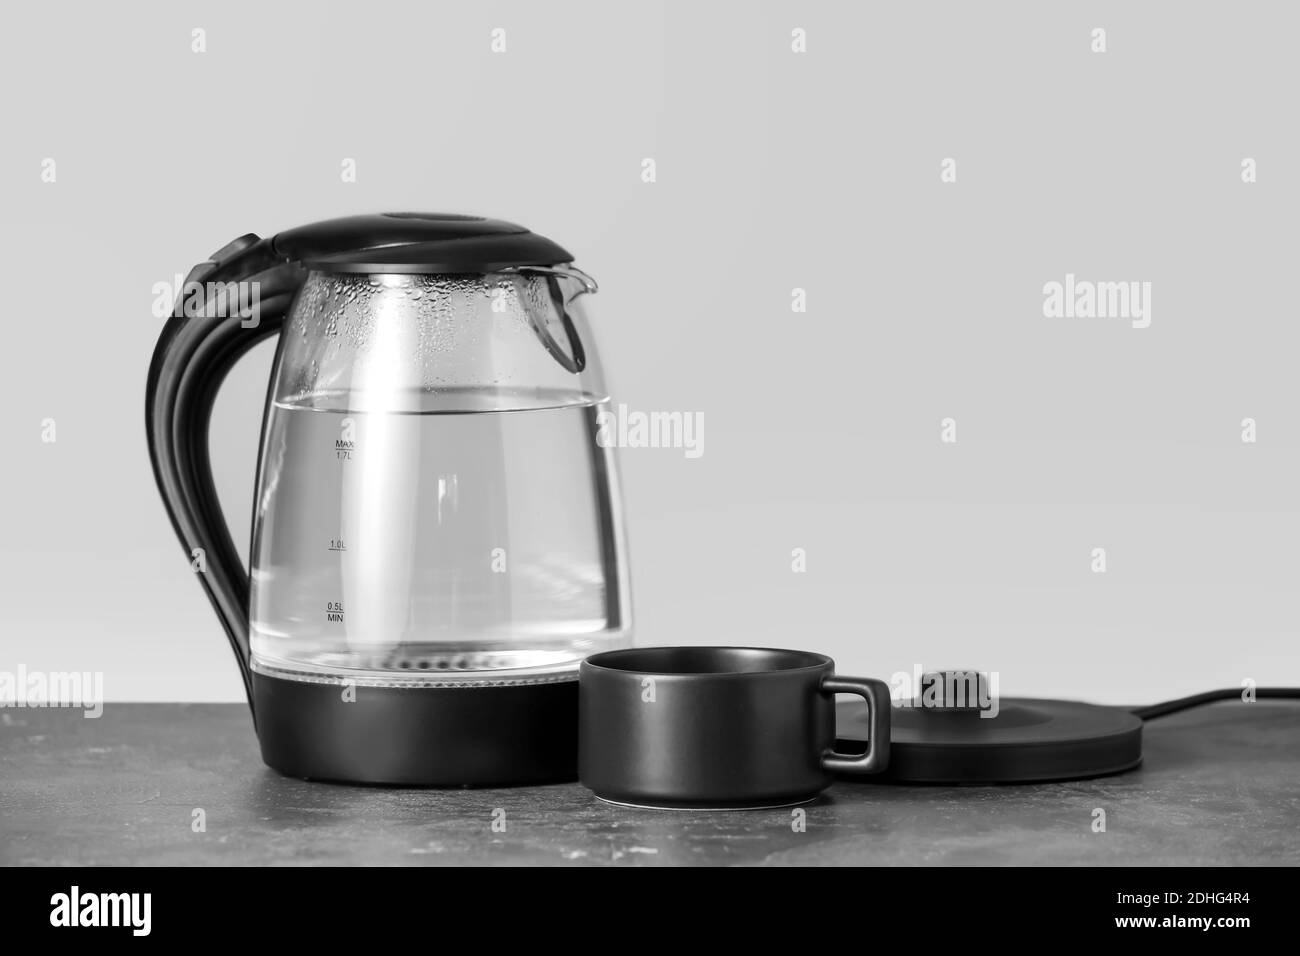 https://c8.alamy.com/comp/2DHG4R4/transparent-electric-kettle-and-cup-on-table-2DHG4R4.jpg